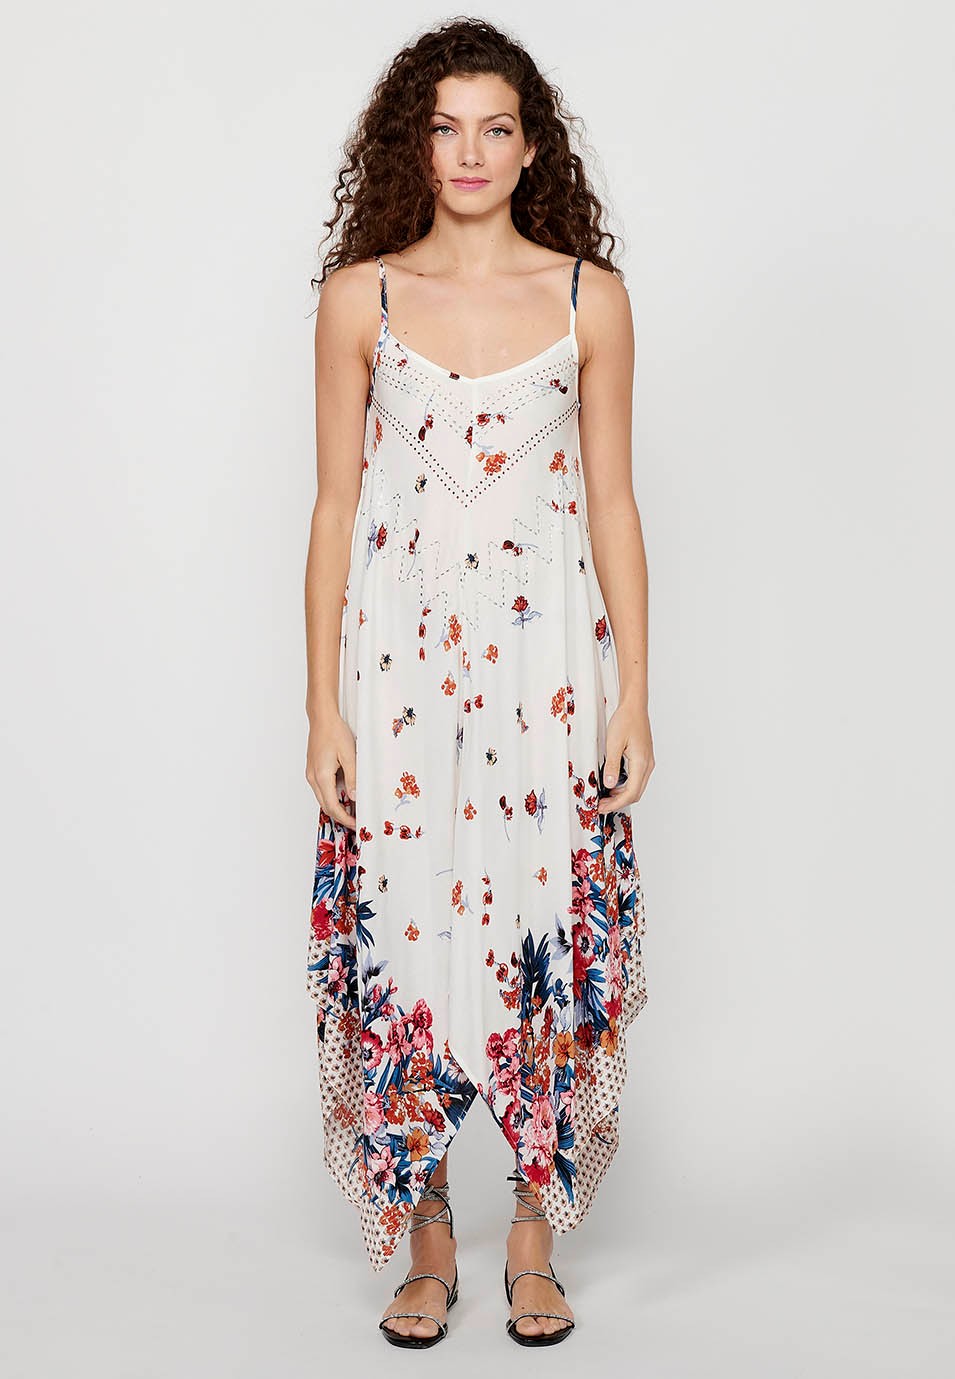 Strap Dress with V-neckline and White Floral Print for Women 1